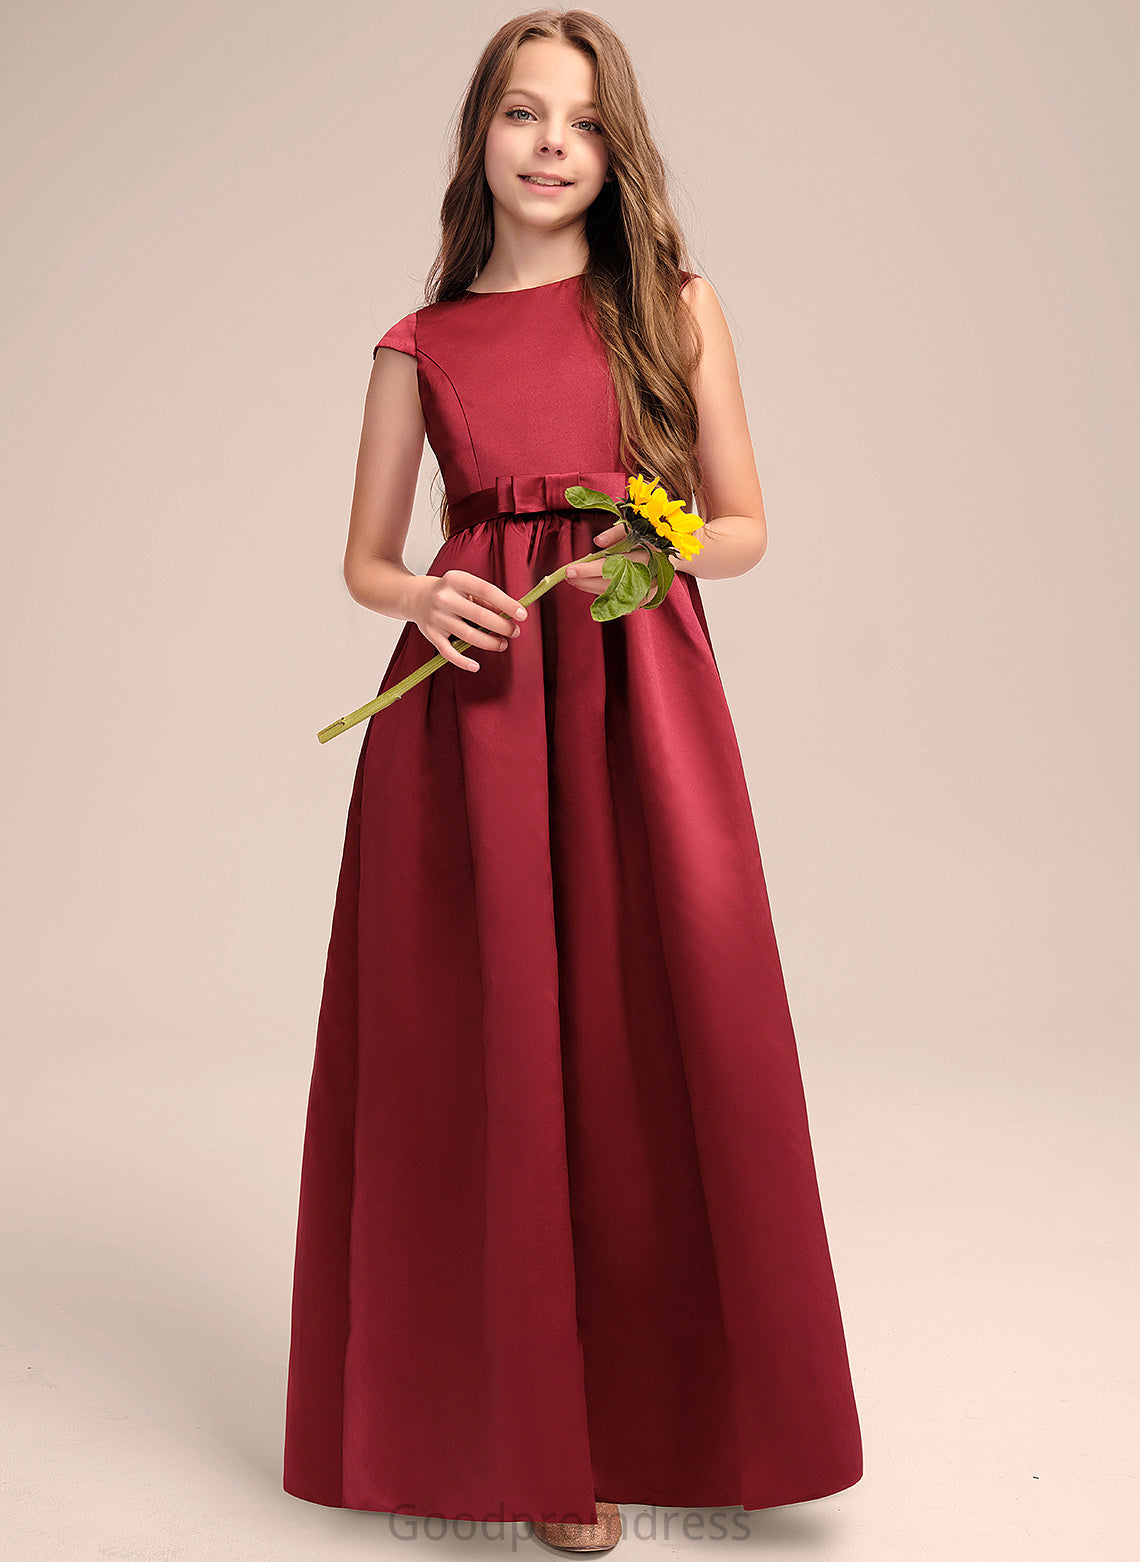 Junior Bridesmaid Dresses Naima Scoop Pockets Bow(s) Neck With Satin A-Line Floor-Length